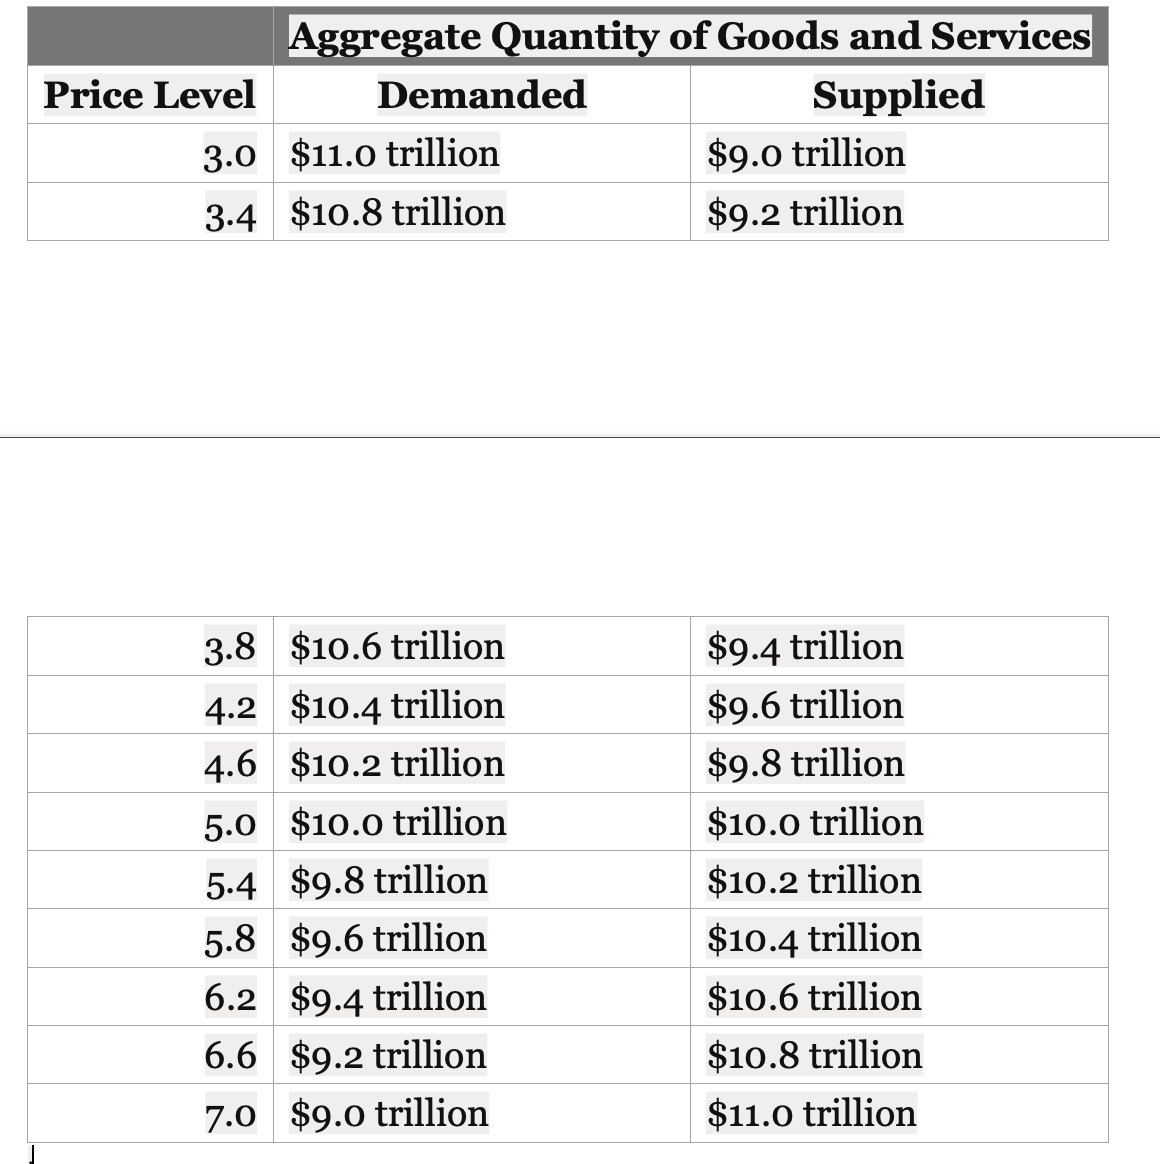 Aggregate Quantity of Goods and Services
Price Level
Demanded
Supplied
3.0 $11.0 trillion
$9.0 trillion
3.4 $10.8 trillion
$9.2 trillion
3.8 $10.6 trillion
$9.4 trillion
4.2 $10.4 trillion
$9.6 trillion
4.6 $10.2 trillion
$9.8 trillion
5.0 $10.0 trillion
$10.0 trillion
5.4 $9.8 trillion
$10.2 trillion
5.8 $9.6 trillion
$10.4 trillion
6.2 $9.4 trillion
$10.6 trillion
6.6 $9.2 trillion
$10.8 trillion
7.0 $9.0 trillion
$11.0 trillion
